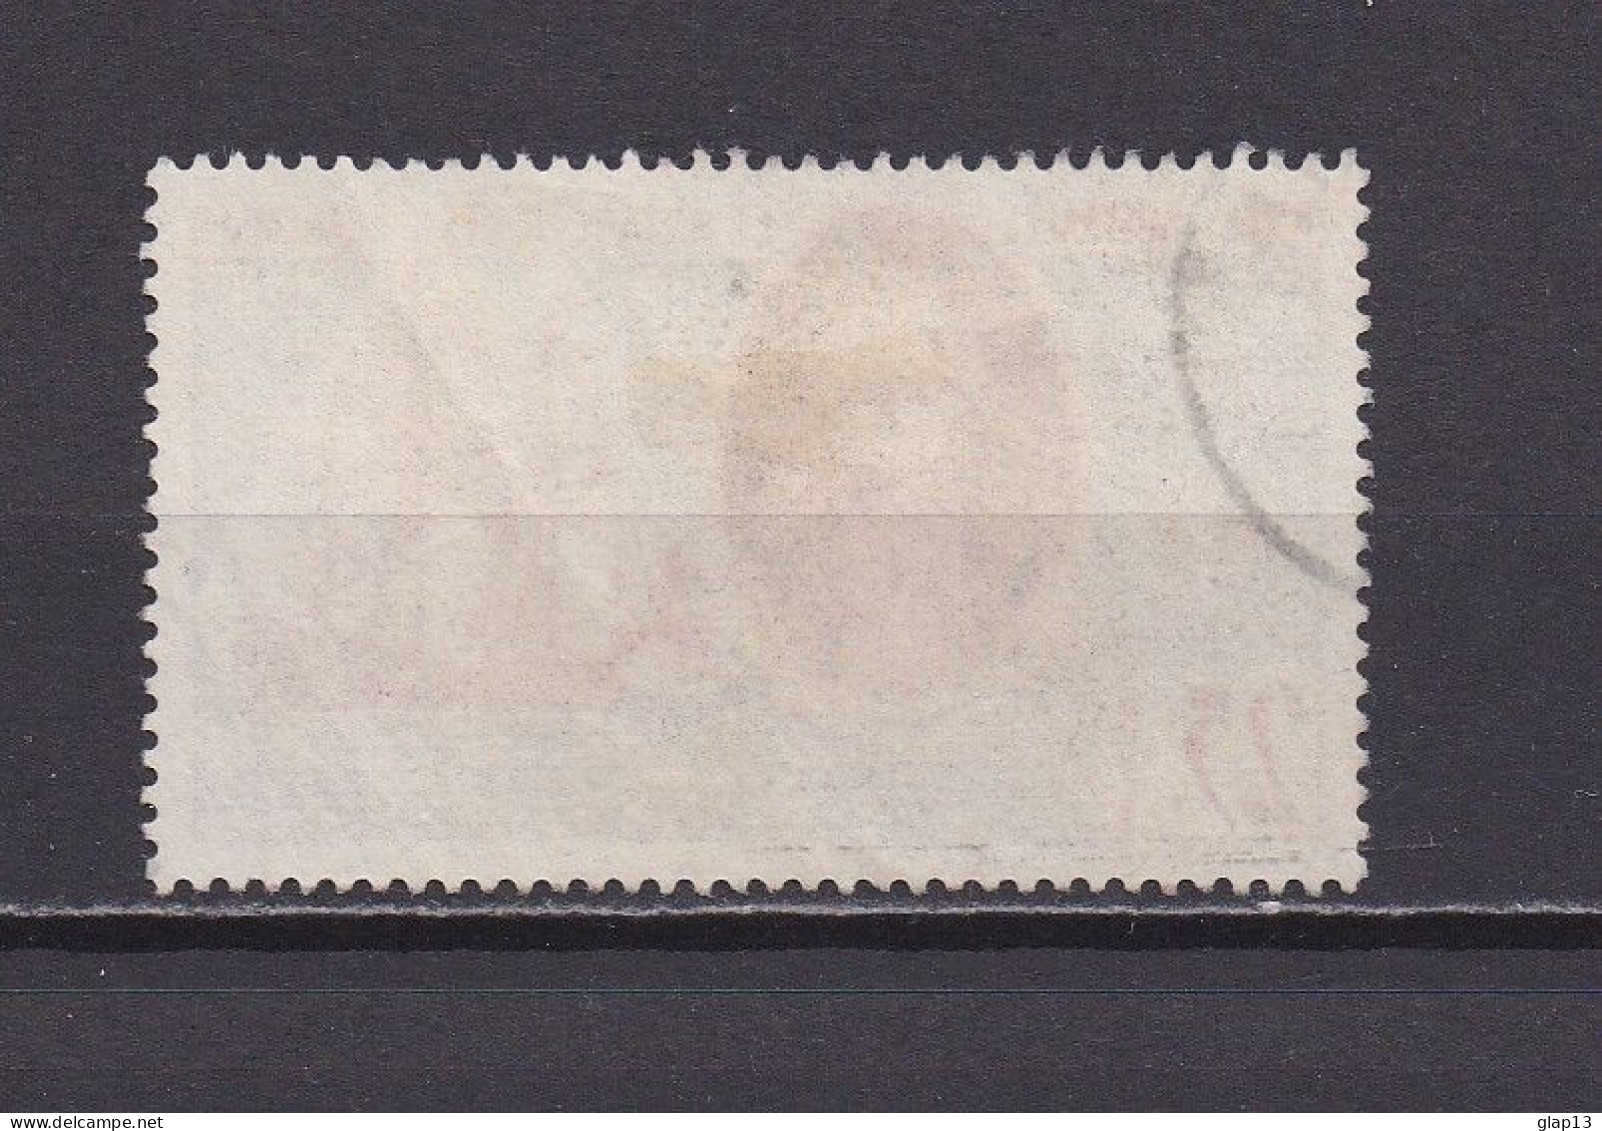 TAAF 1959 TIMBRE N°18 OBLITERE CHEVALIER DE KERGUELEN - Used Stamps